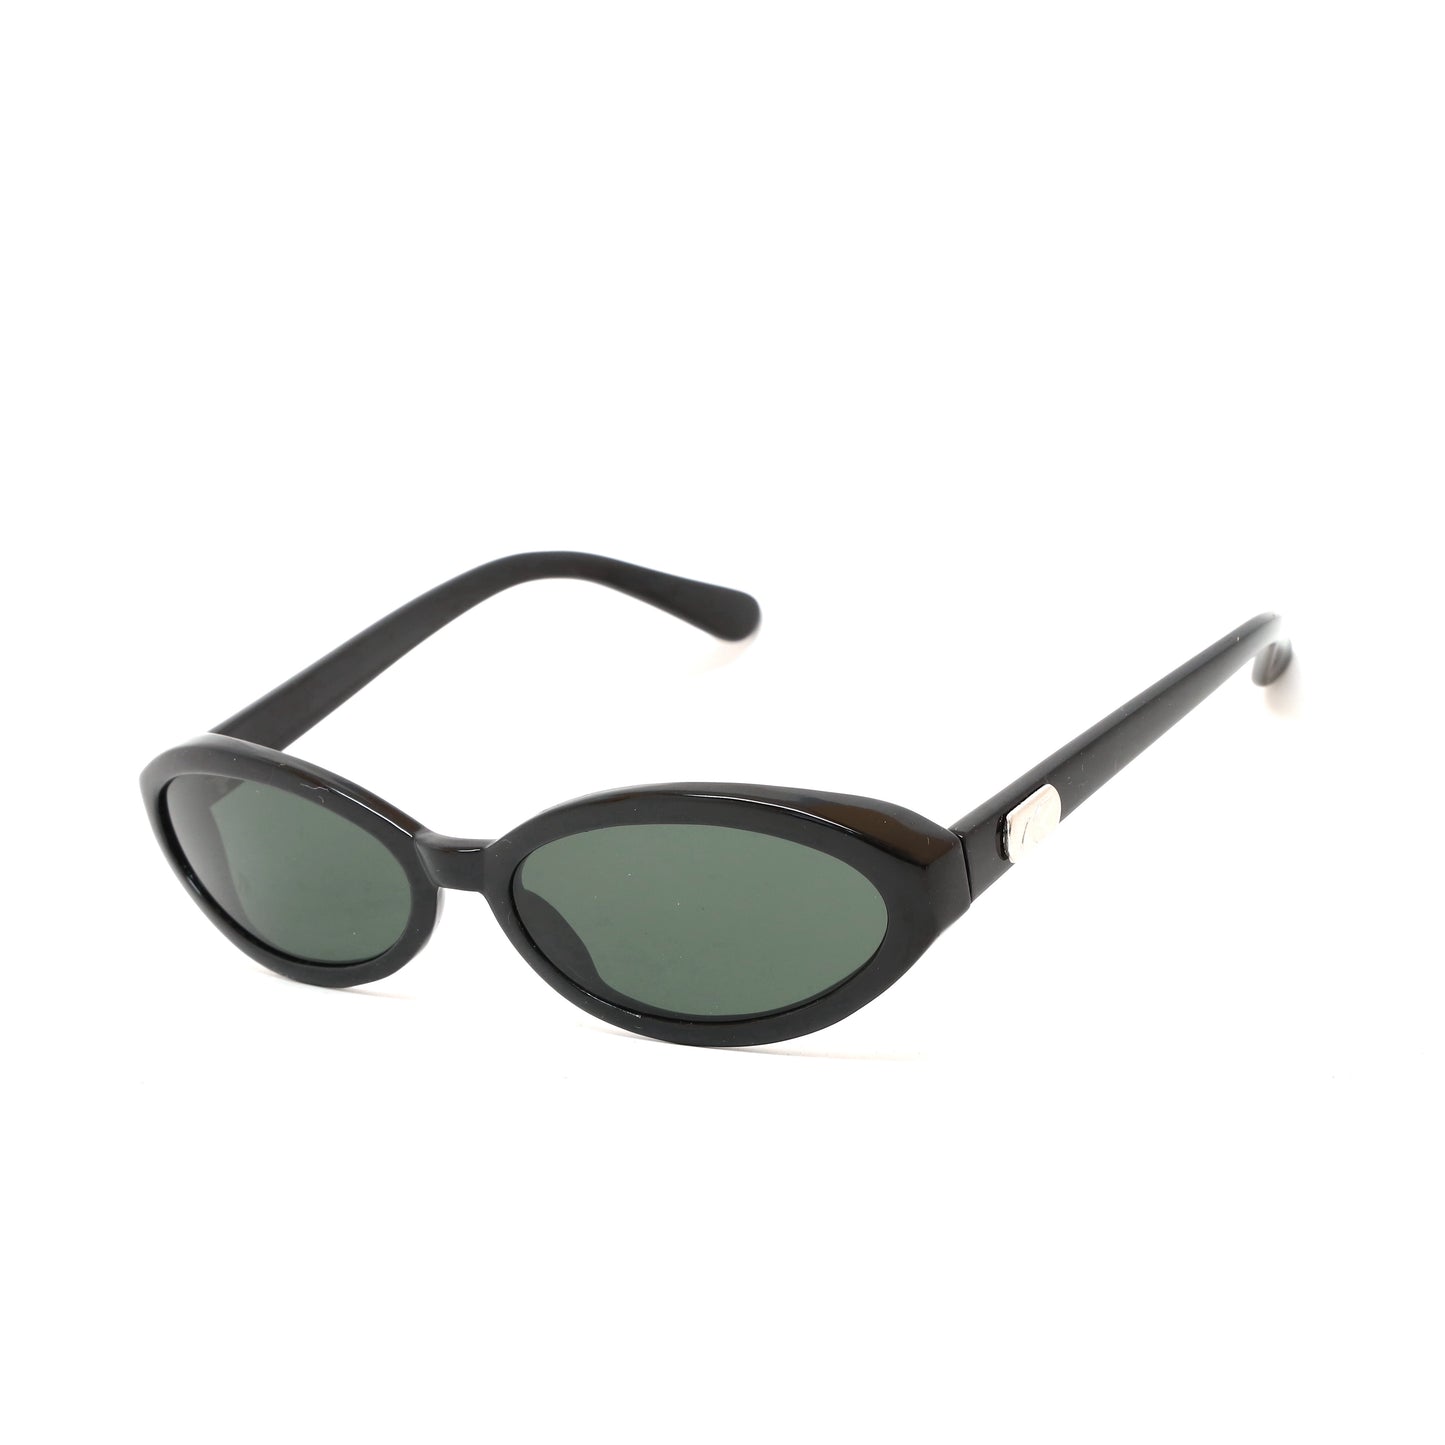 Deluxe Vintage 90s Deadstock High Quality Oval Sunglasses - Black